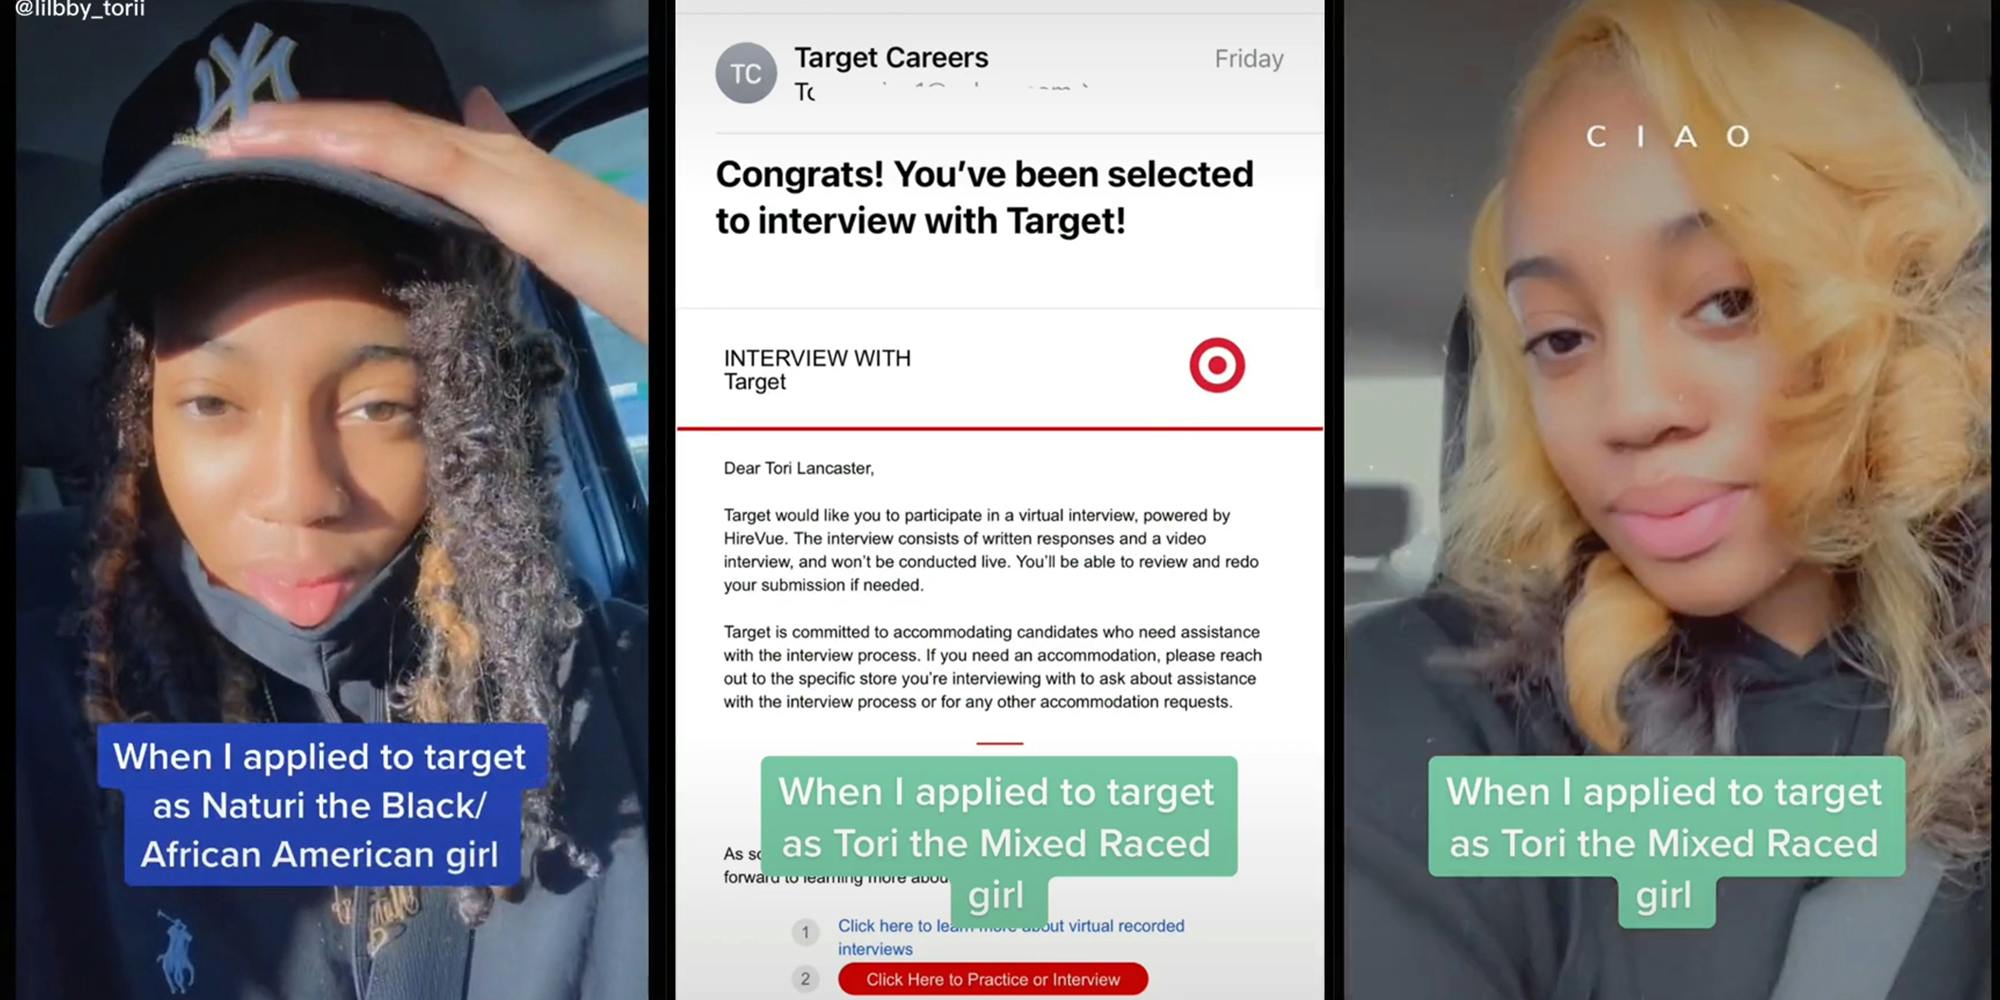 young woman in car with hat and caption "when i applied to target as Naturi the Black/African American girl" (l) Target Careers email (c) young woman with blonde hair and caption "When I applied to target as Tori the Mixed Raced girl" (r)